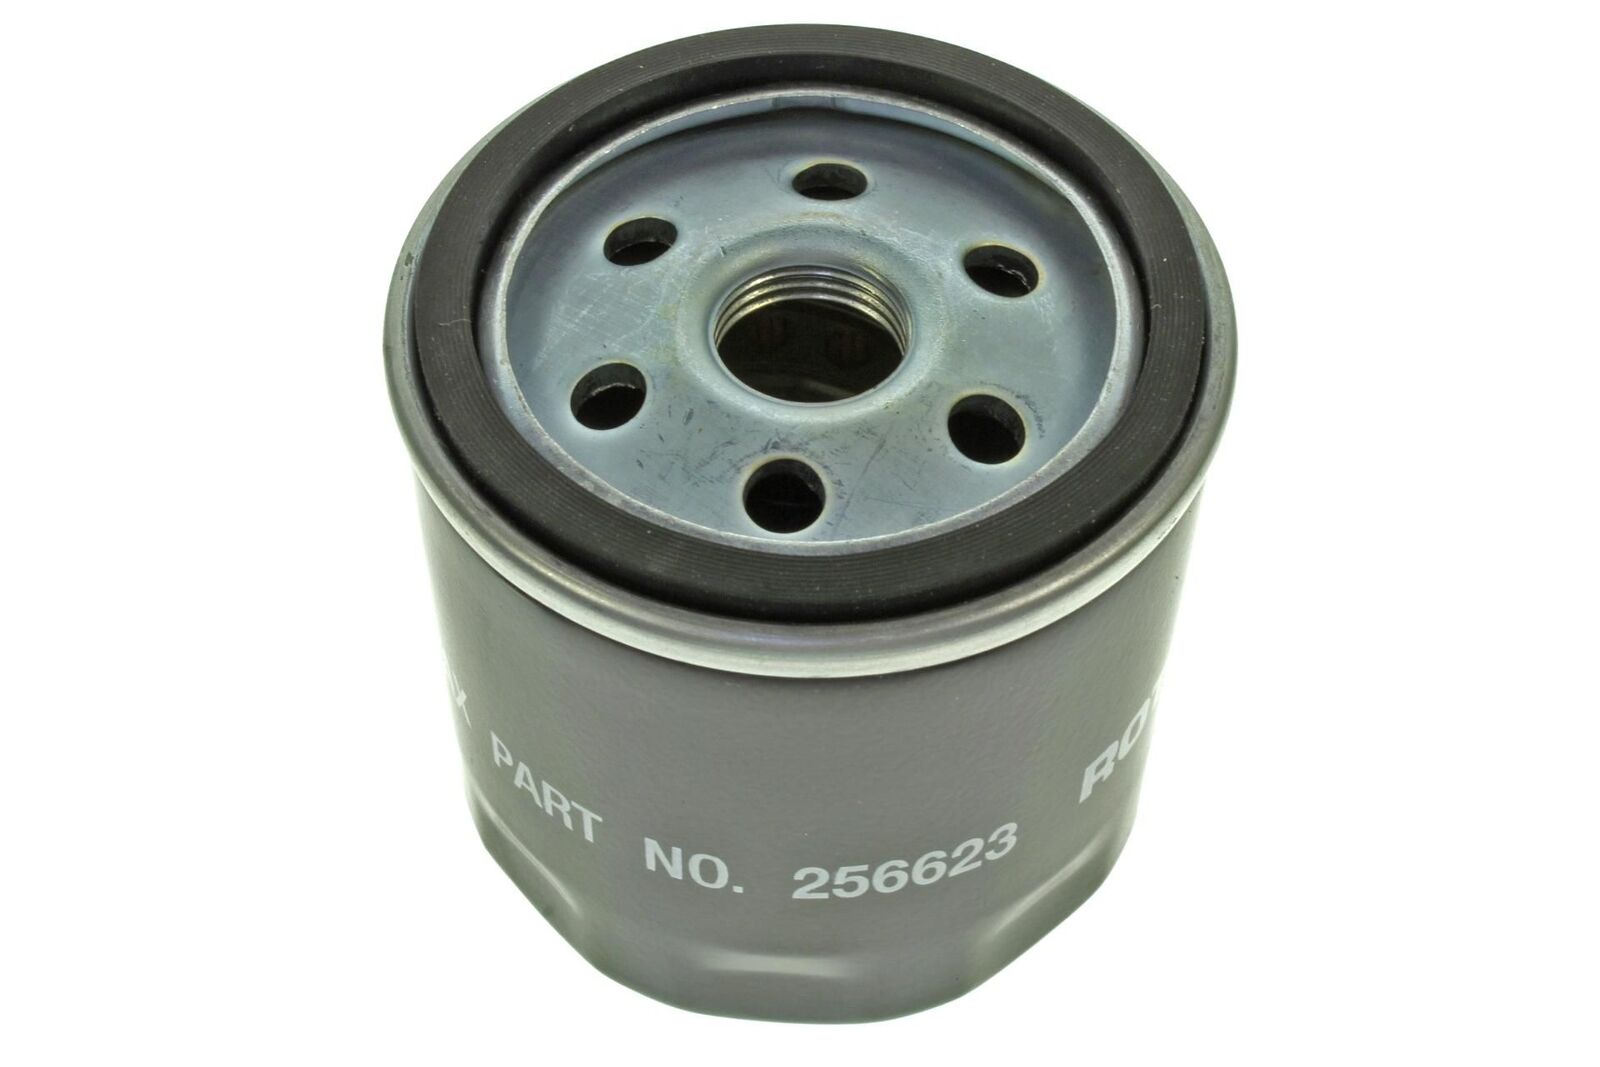 Can-Am New OEM, Traxter (M-500) Rotax Oil Filter - RB-X353, 420256620 420256623